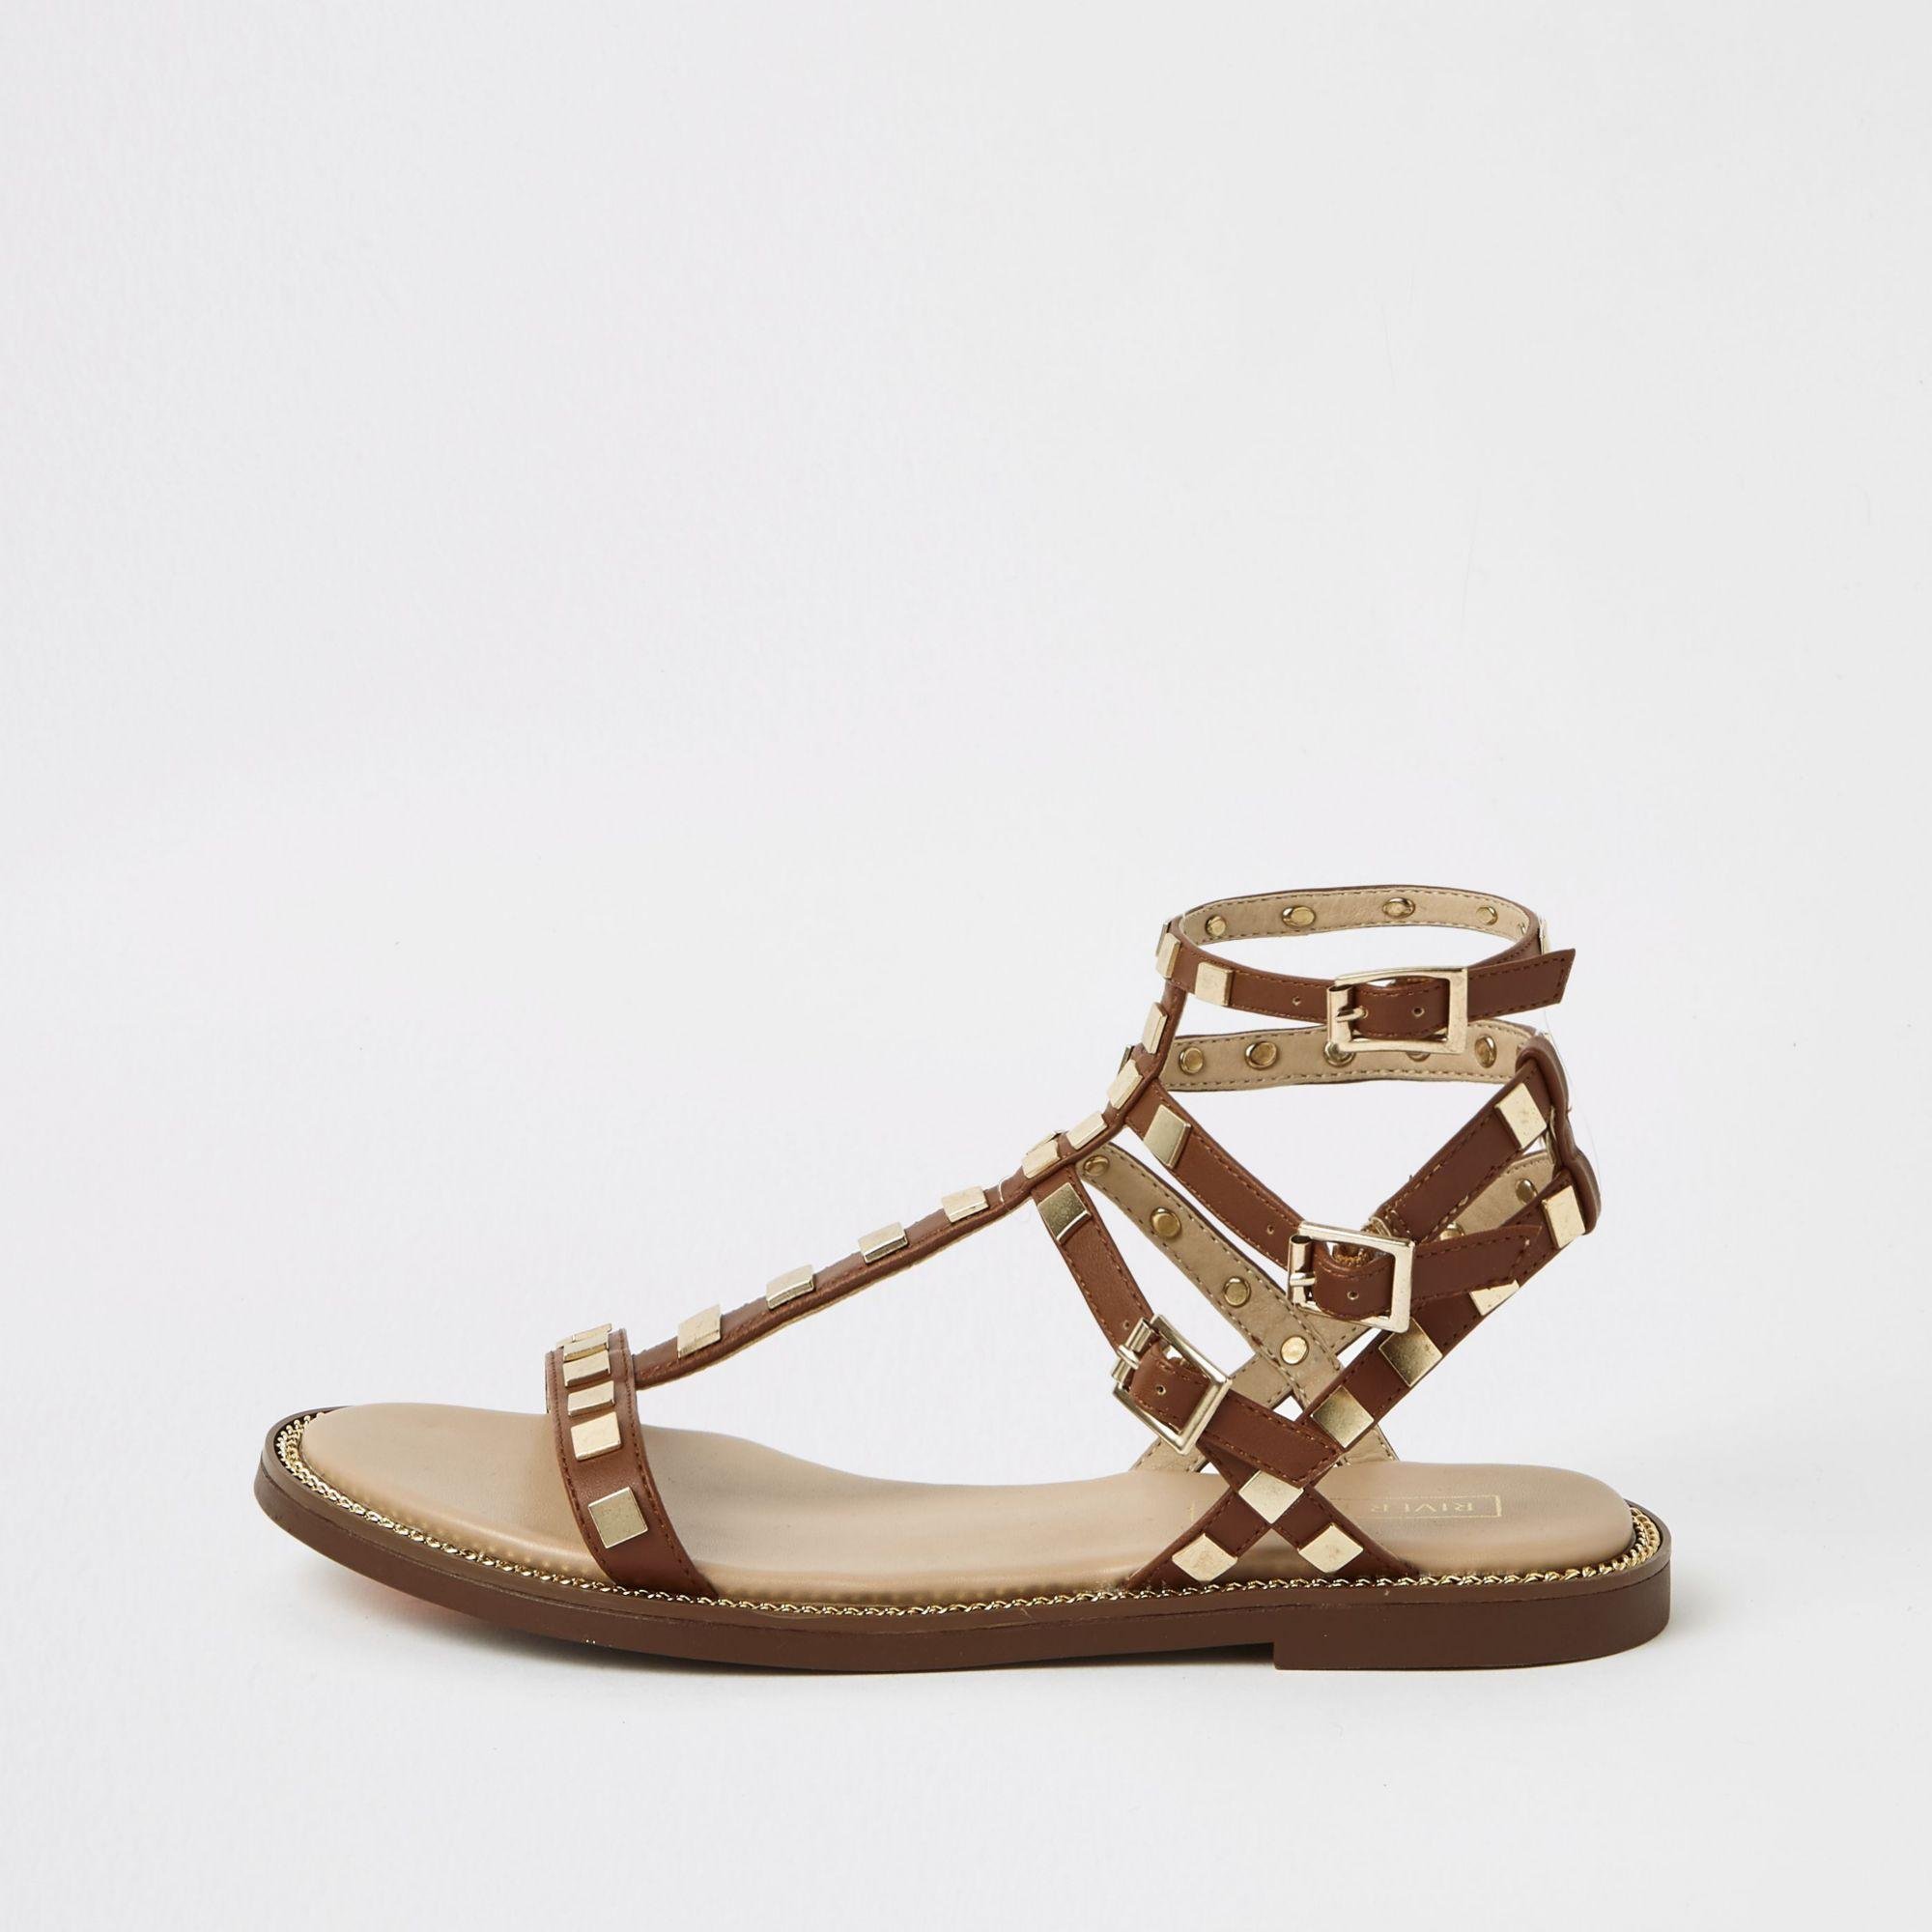 River Island Studded Wide Fit Gladiator Sandals in Brown - Lyst